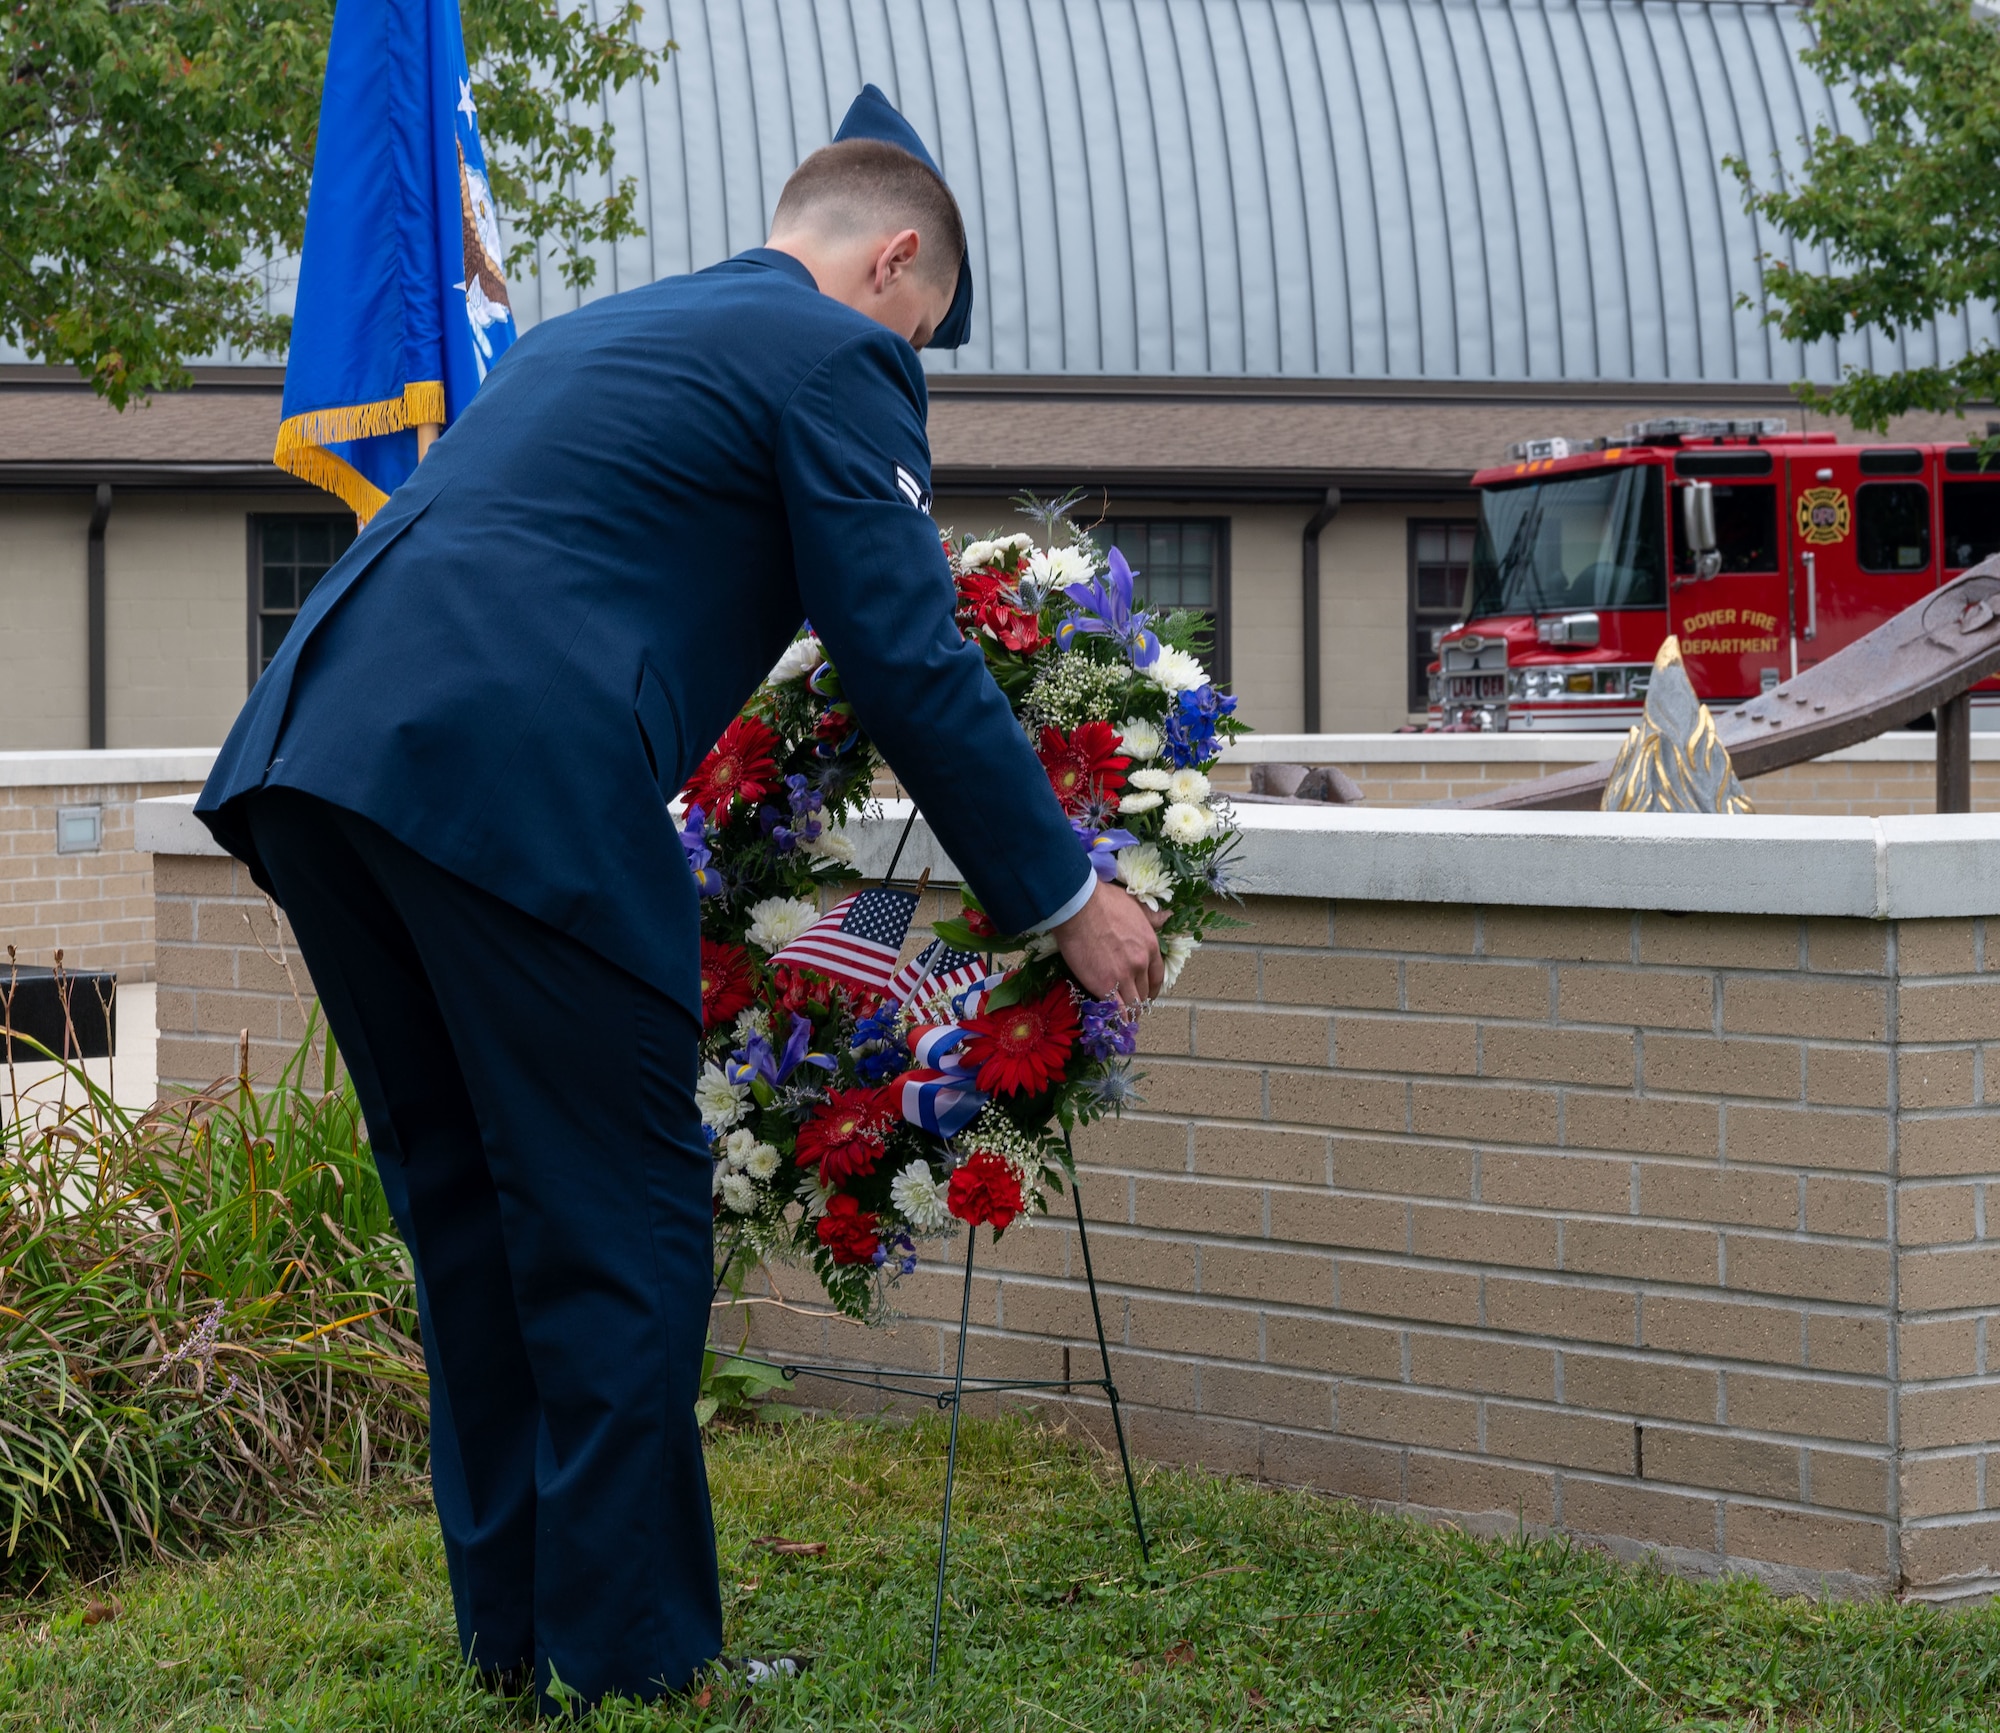 Airman 1st Class Carson Weiers, 436th Civil Engineer Squadron firefighter, places a wreath during the 21st Anniversary 9/11 Memorial Ceremony held at the Air Mobility Command Museum on Dover Air Force Base, Delaware, Sept. 11, 2022. The base hosted the ceremony to remember and honor those who perished in the attacks on Sept. 11, 2001. (U.S. Air Force photo by Senior Airman Cydney Lee)